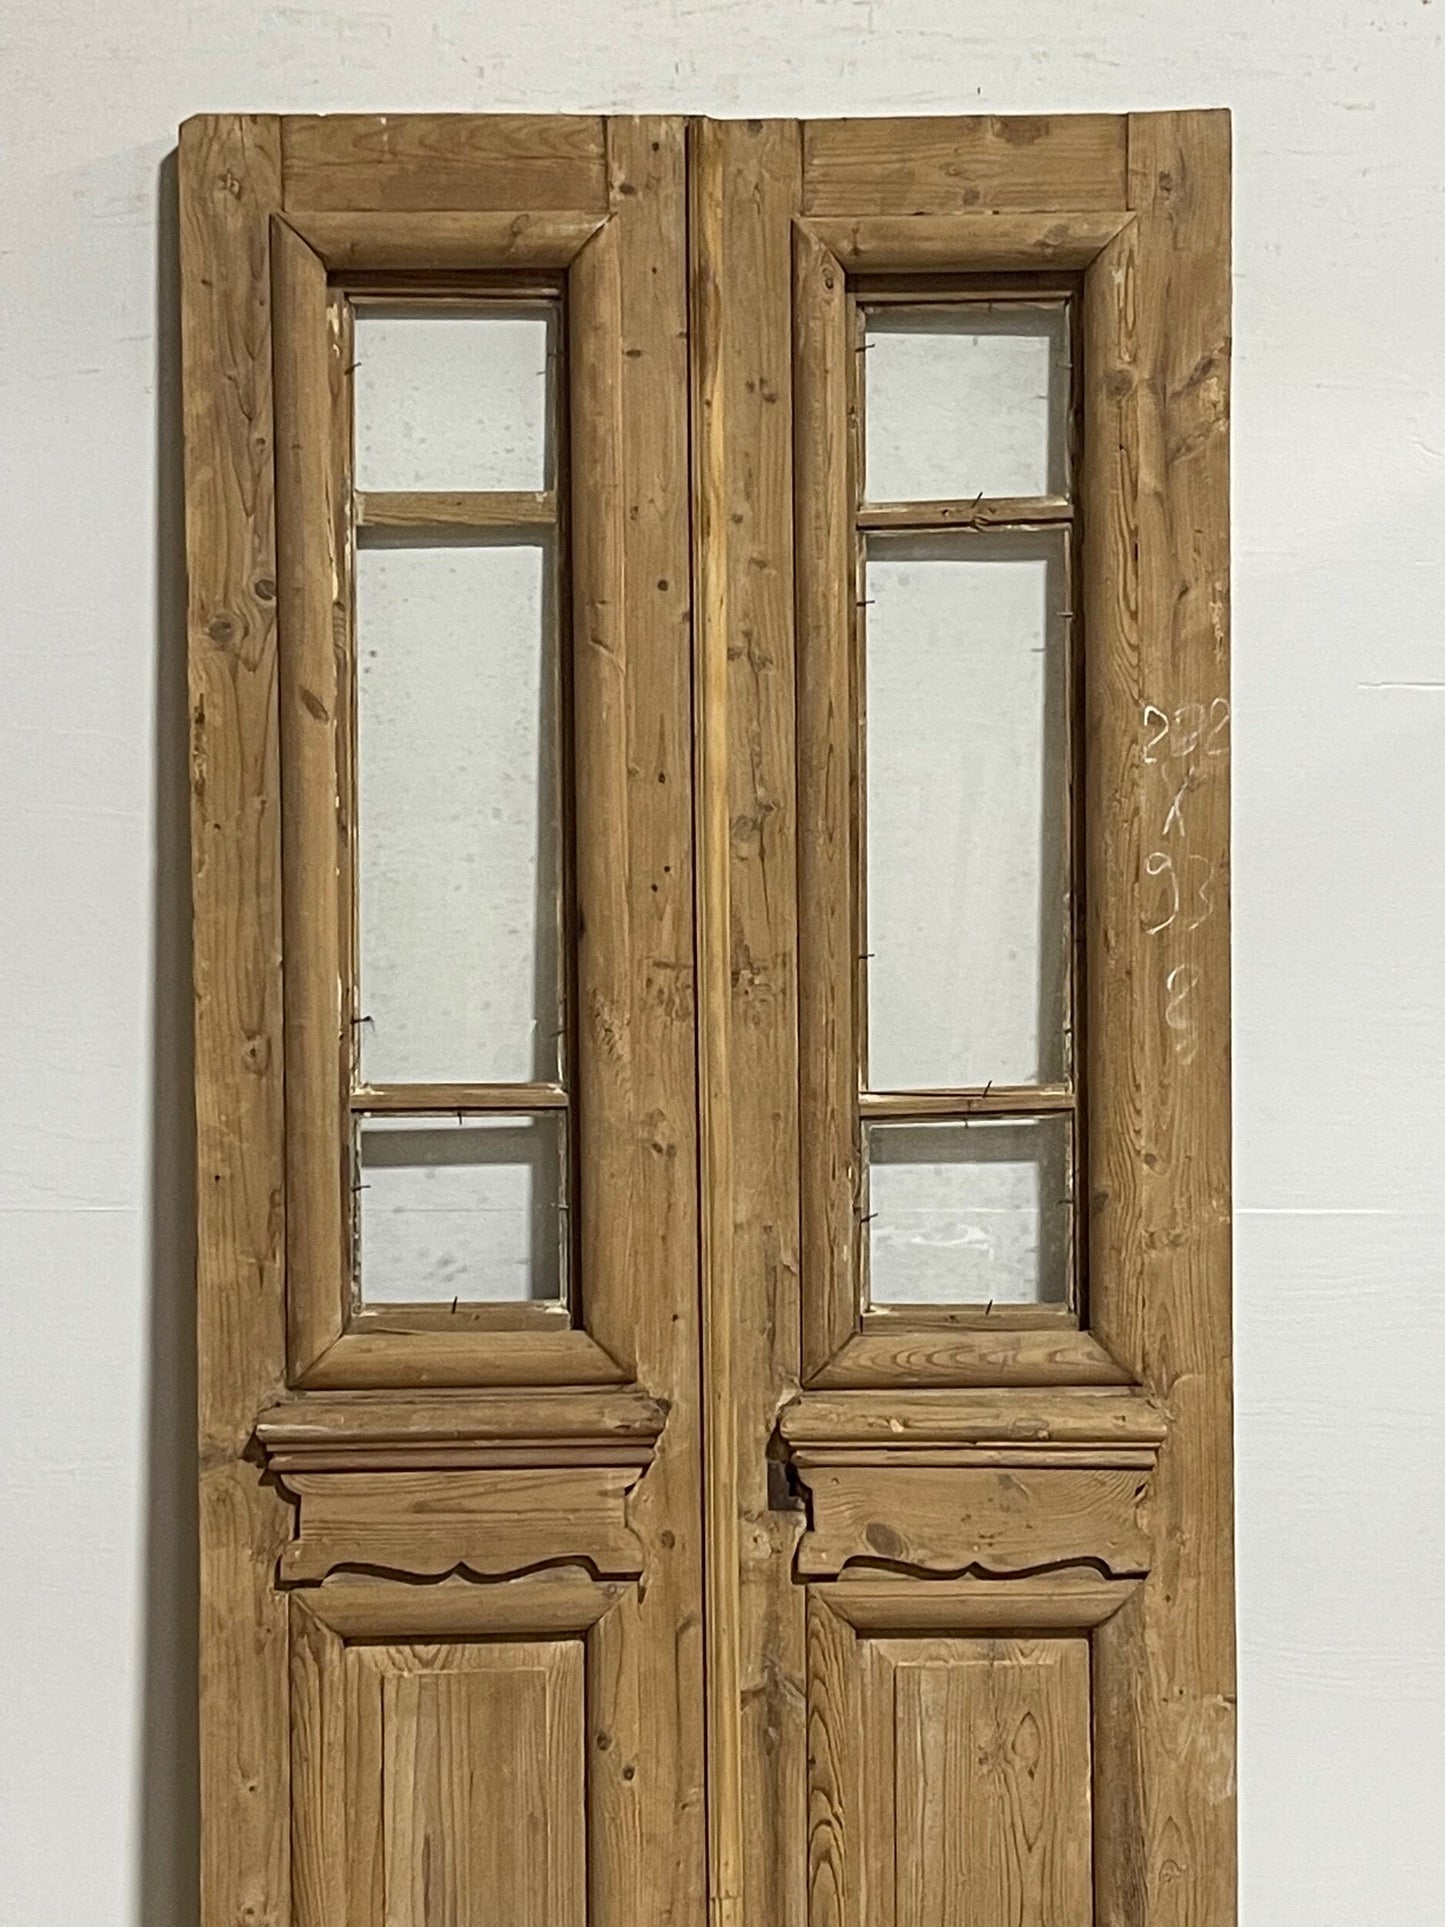 Antique French doors with glass (87x36.5) H0100s